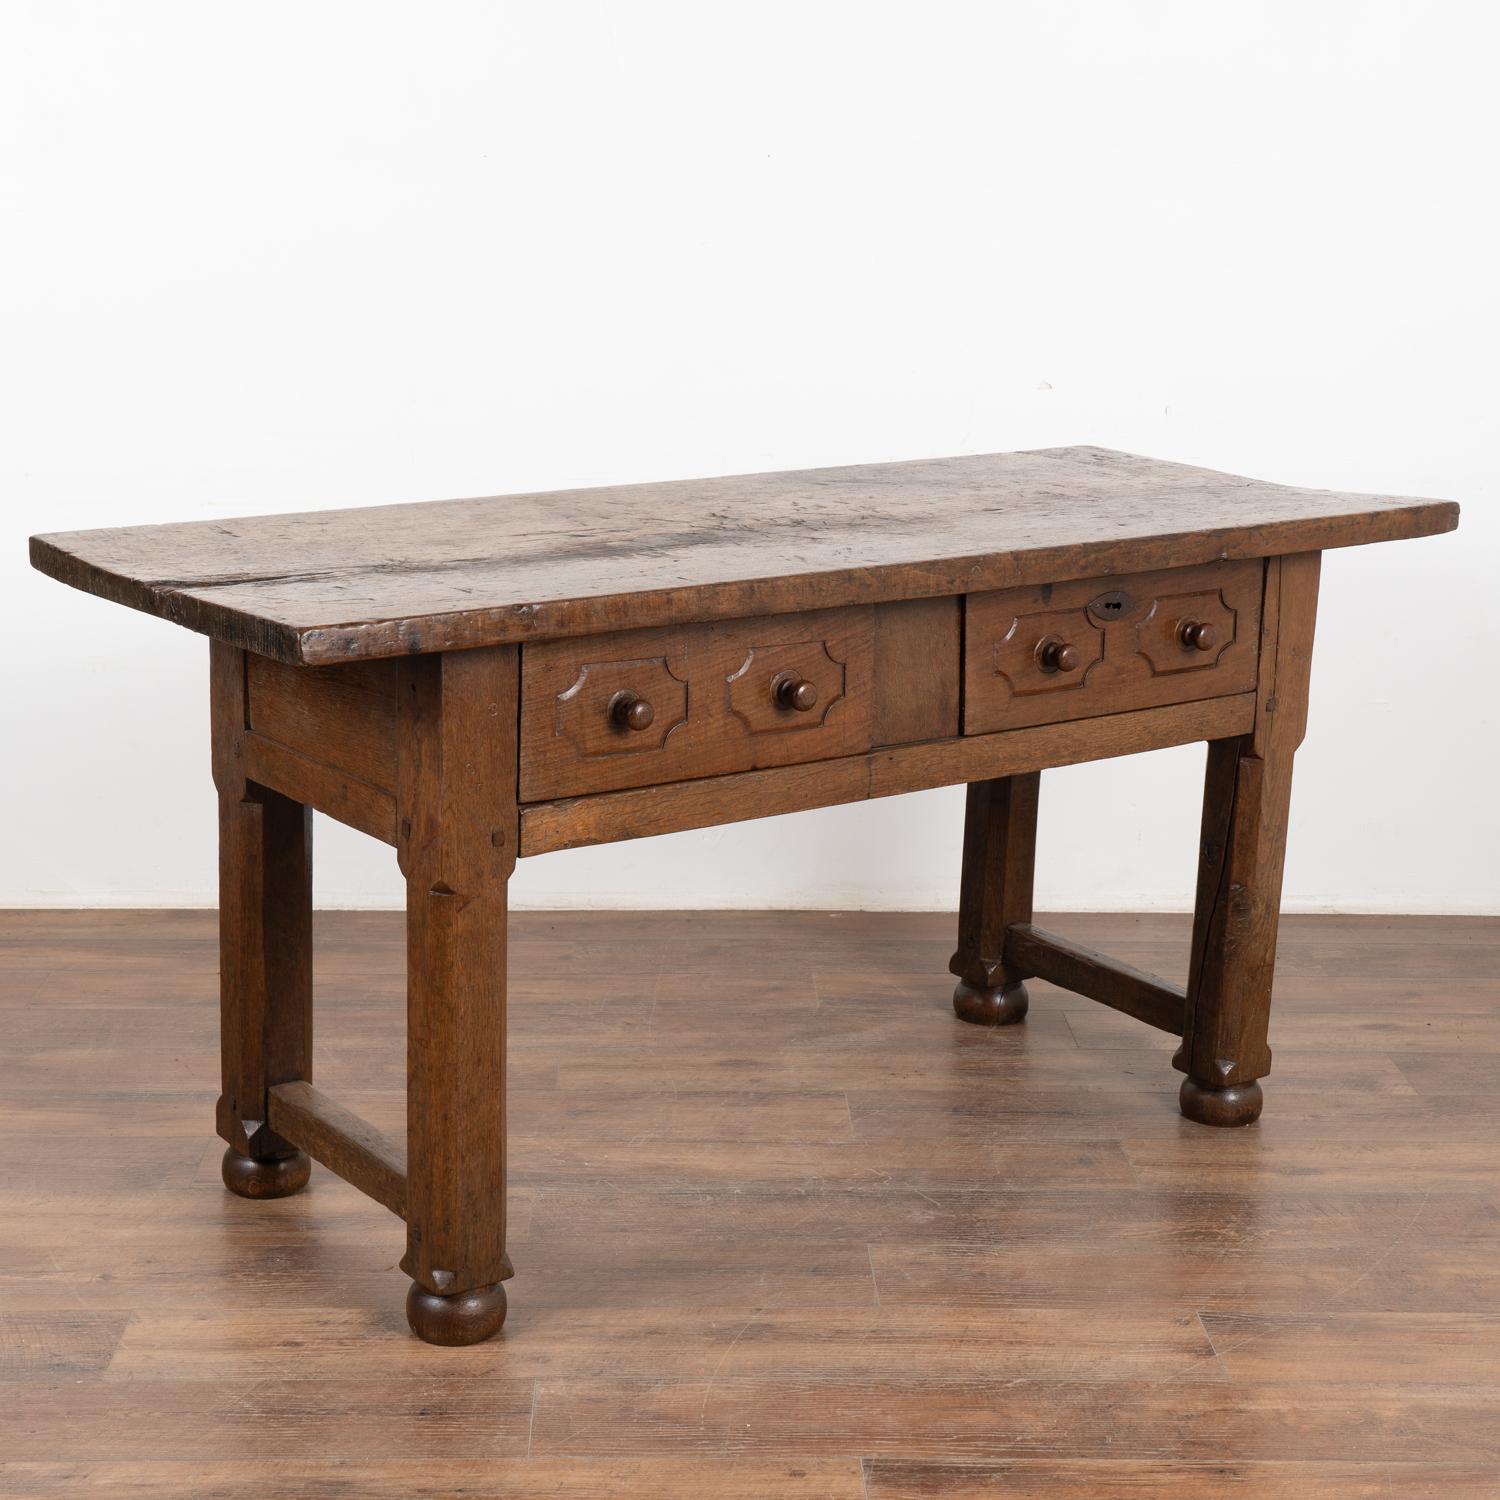 Dark oak console table with two drawers from Spain.
Please enlarge photos (especially of top) to appreciate the dark patina of the wood, including old cracks, gouges, stains and nicks that add to the aged appeal of this handsome table.
At 5.5' long,